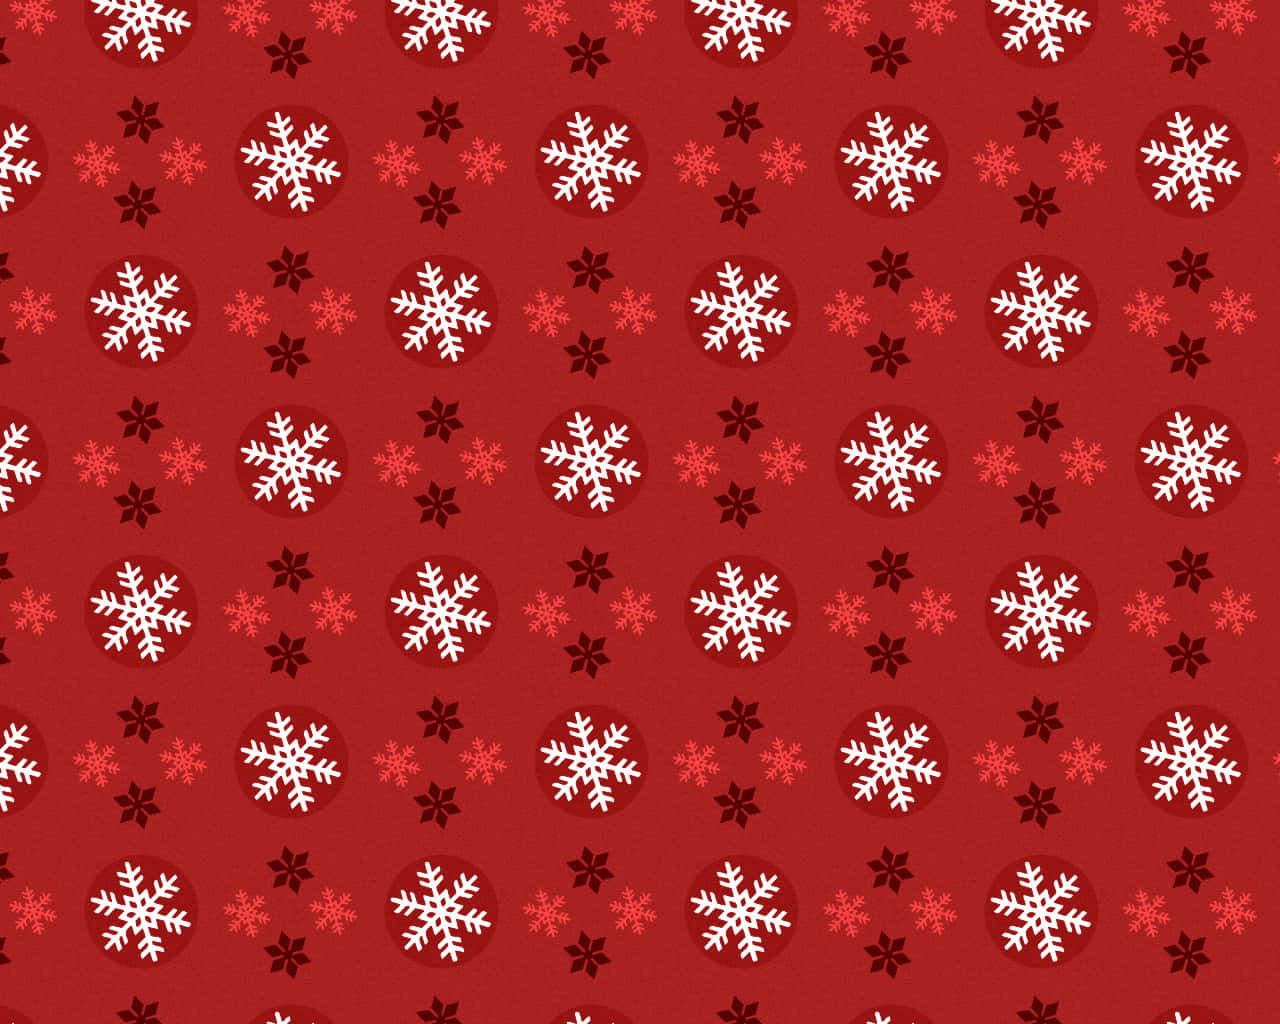 Wintry Christmas Pattern – A Magical Holiday Scene Wallpaper